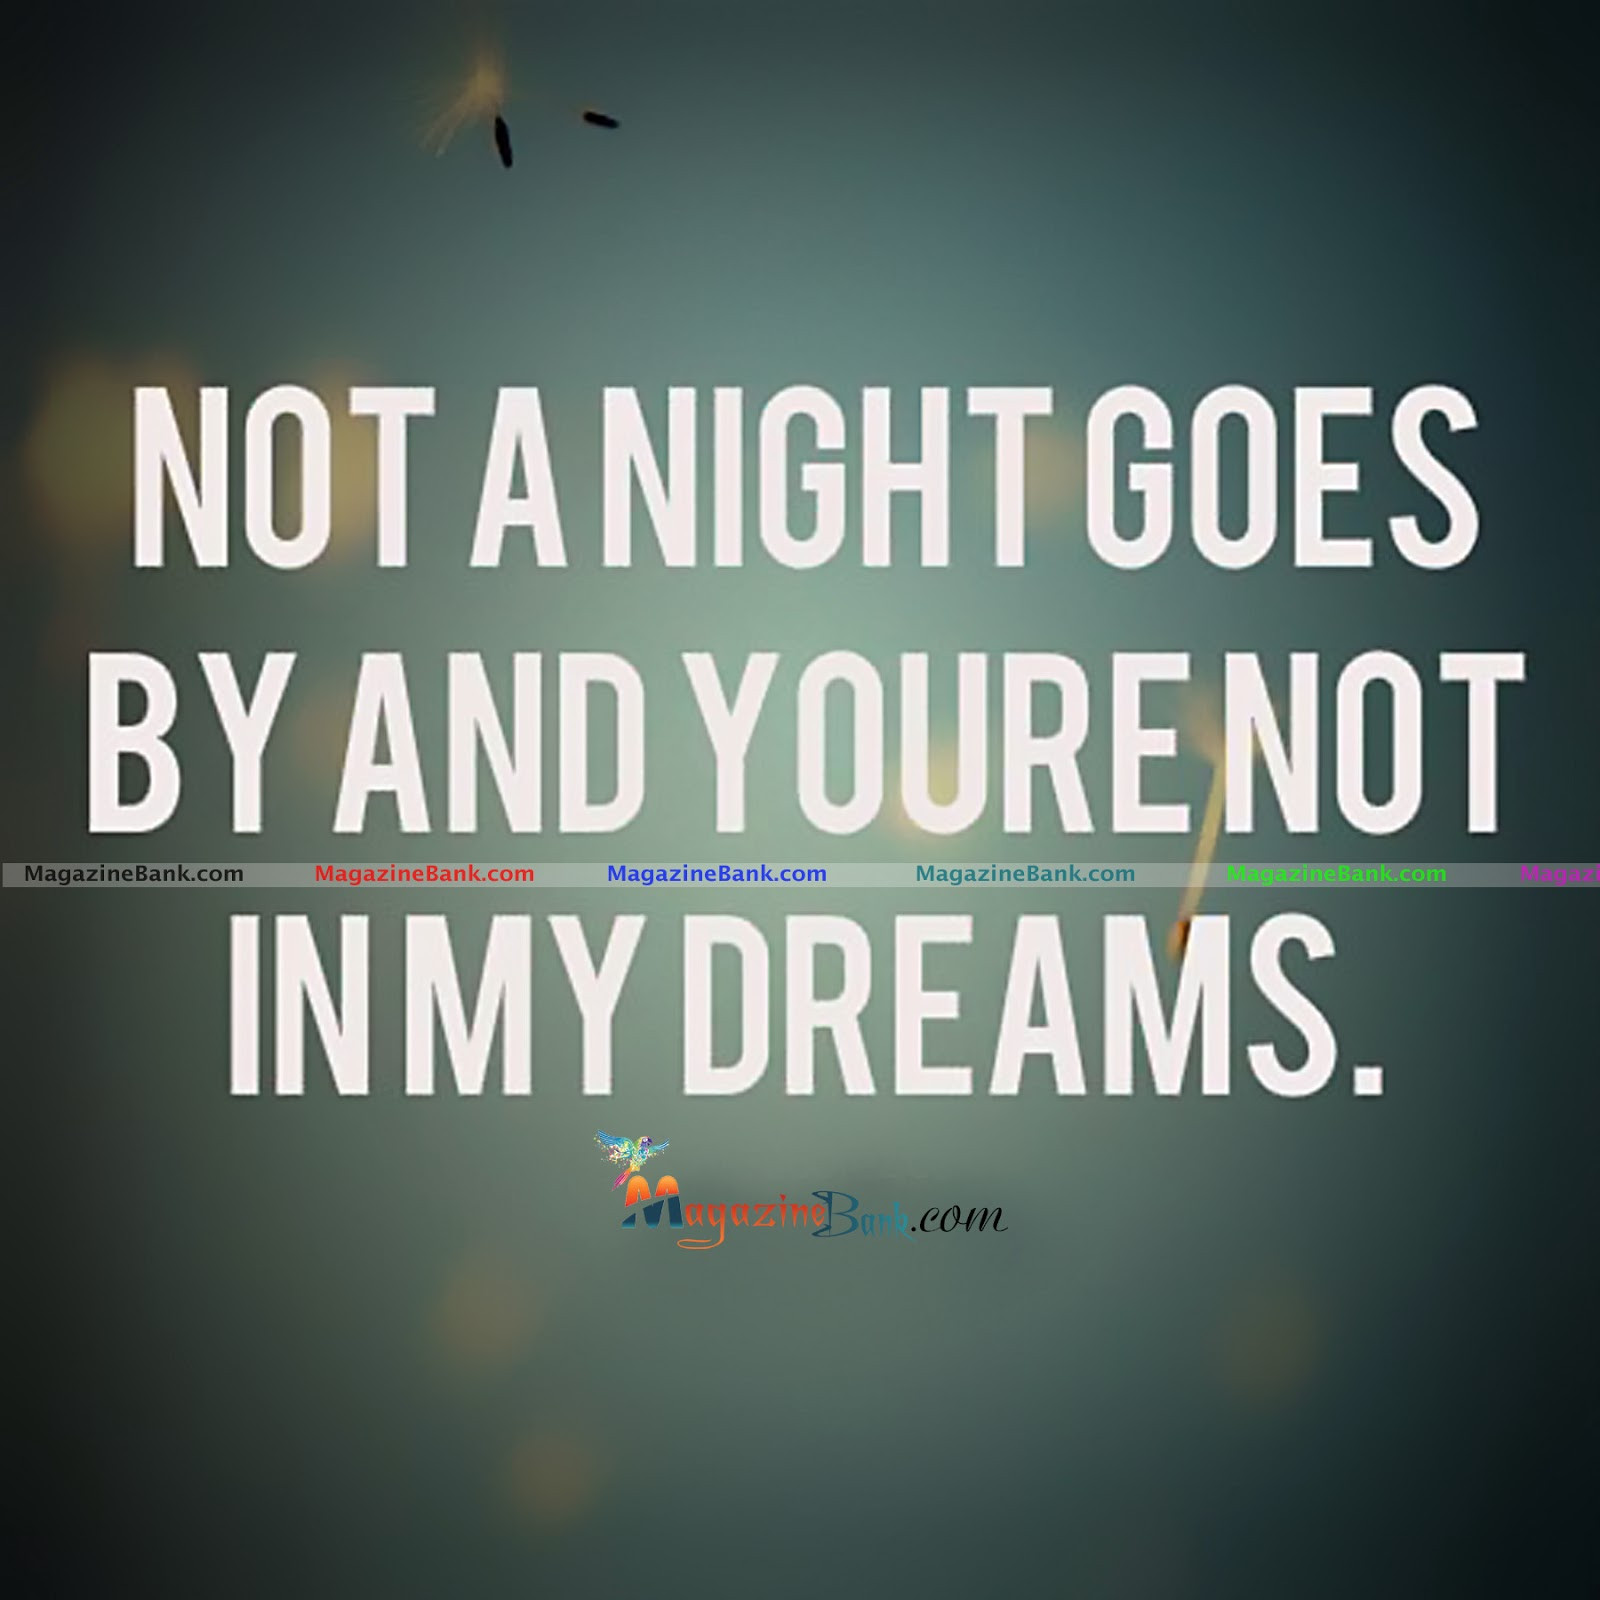 Romantic Quotes For Her
 Romantic Good Night Quotes For Her QuotesGram